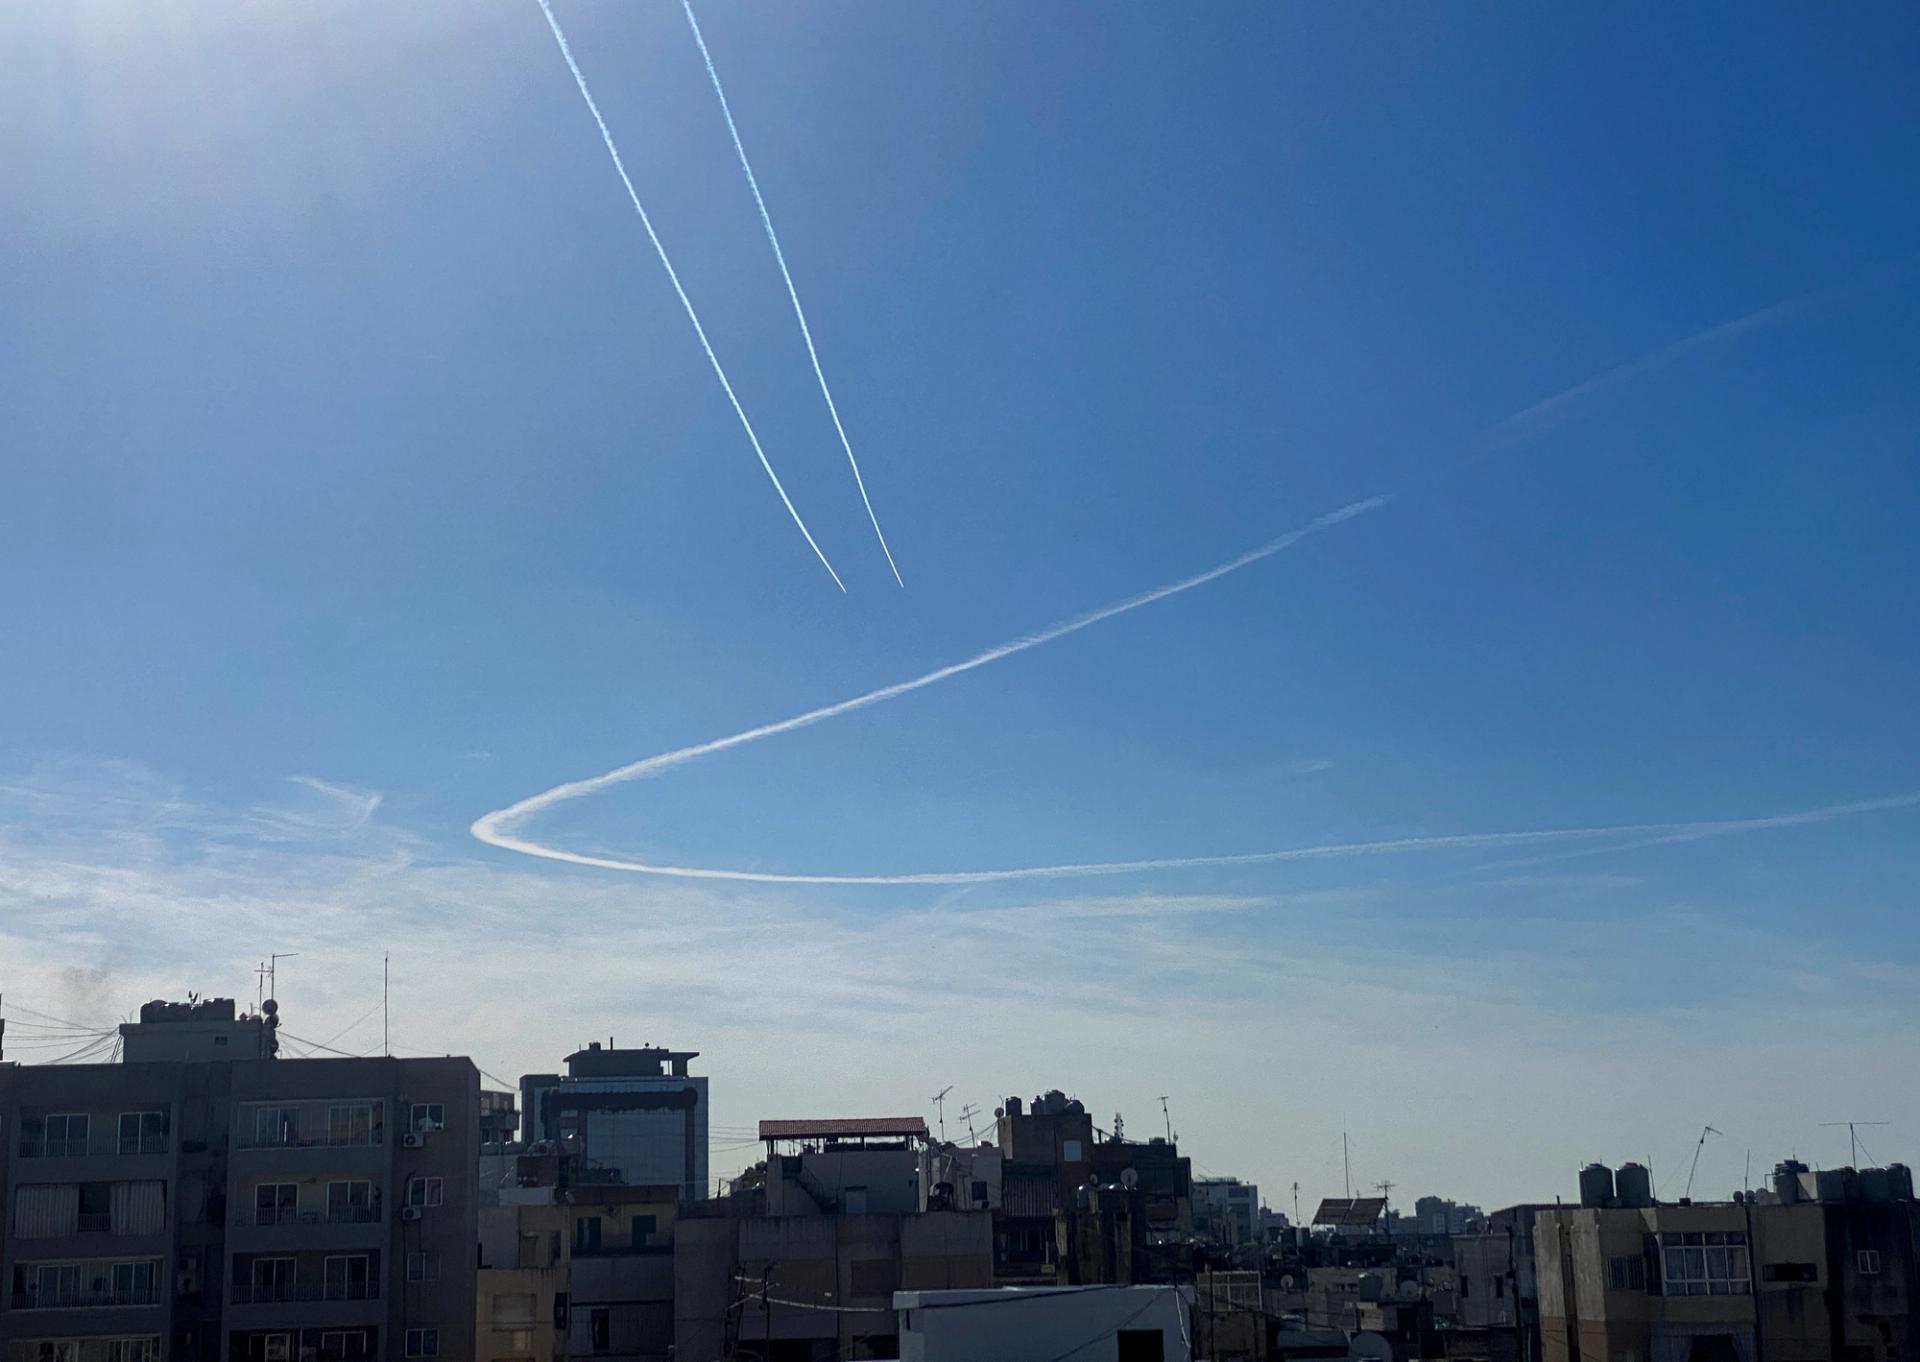 Aircraft leave vapour trails in the sky above Beirut, Lebanon December 10, 2023. REUTERS/Cynthia Karam